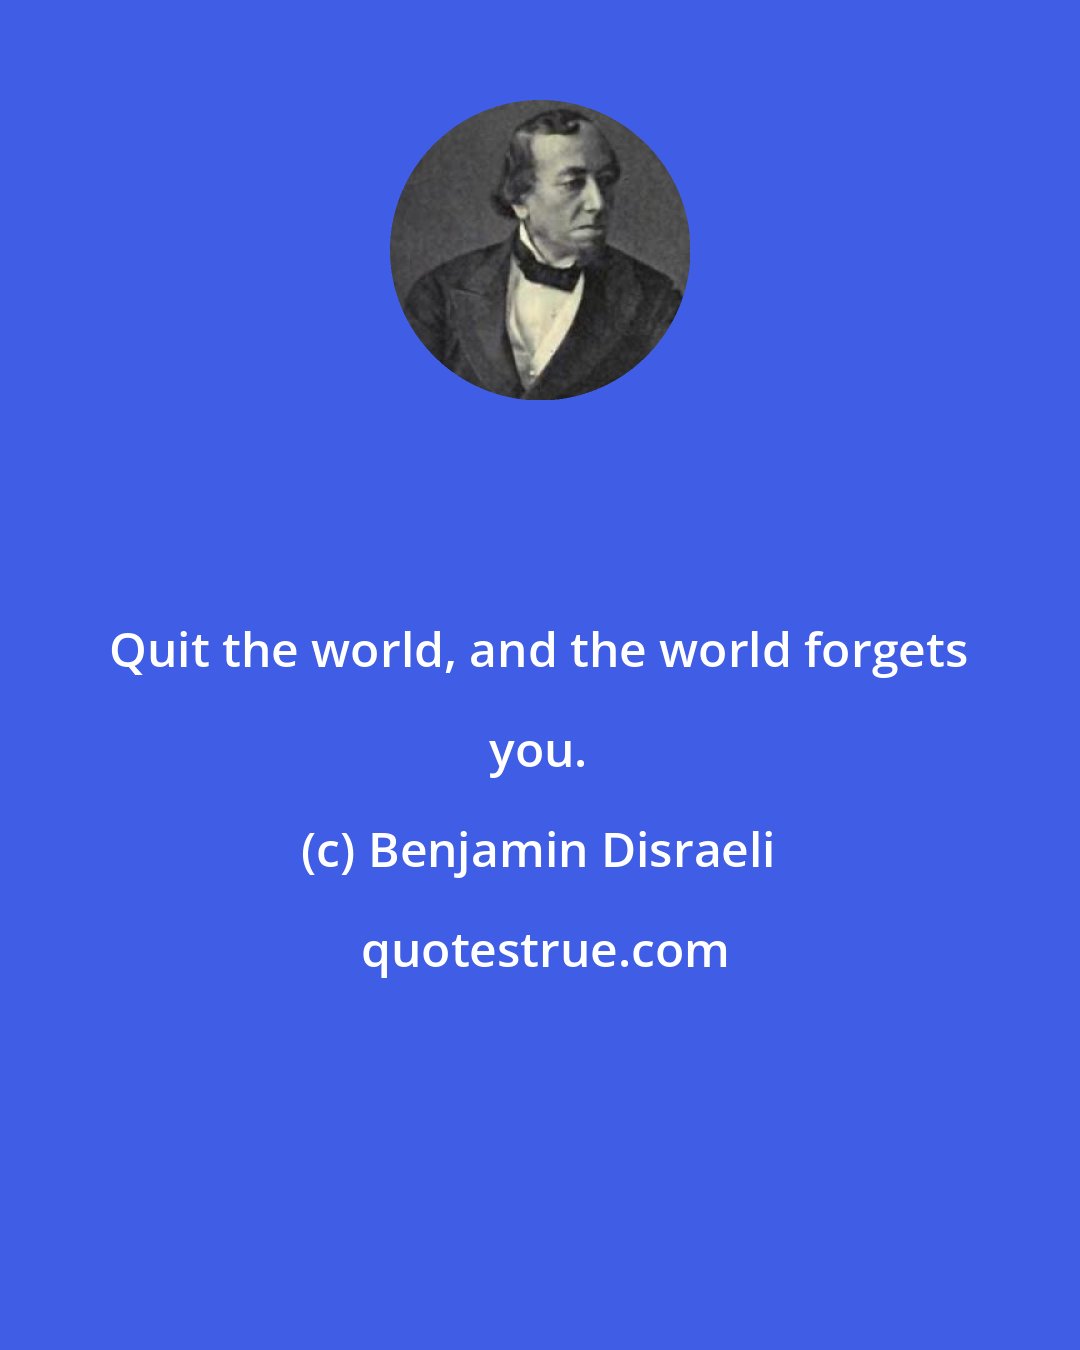 Benjamin Disraeli: Quit the world, and the world forgets you.